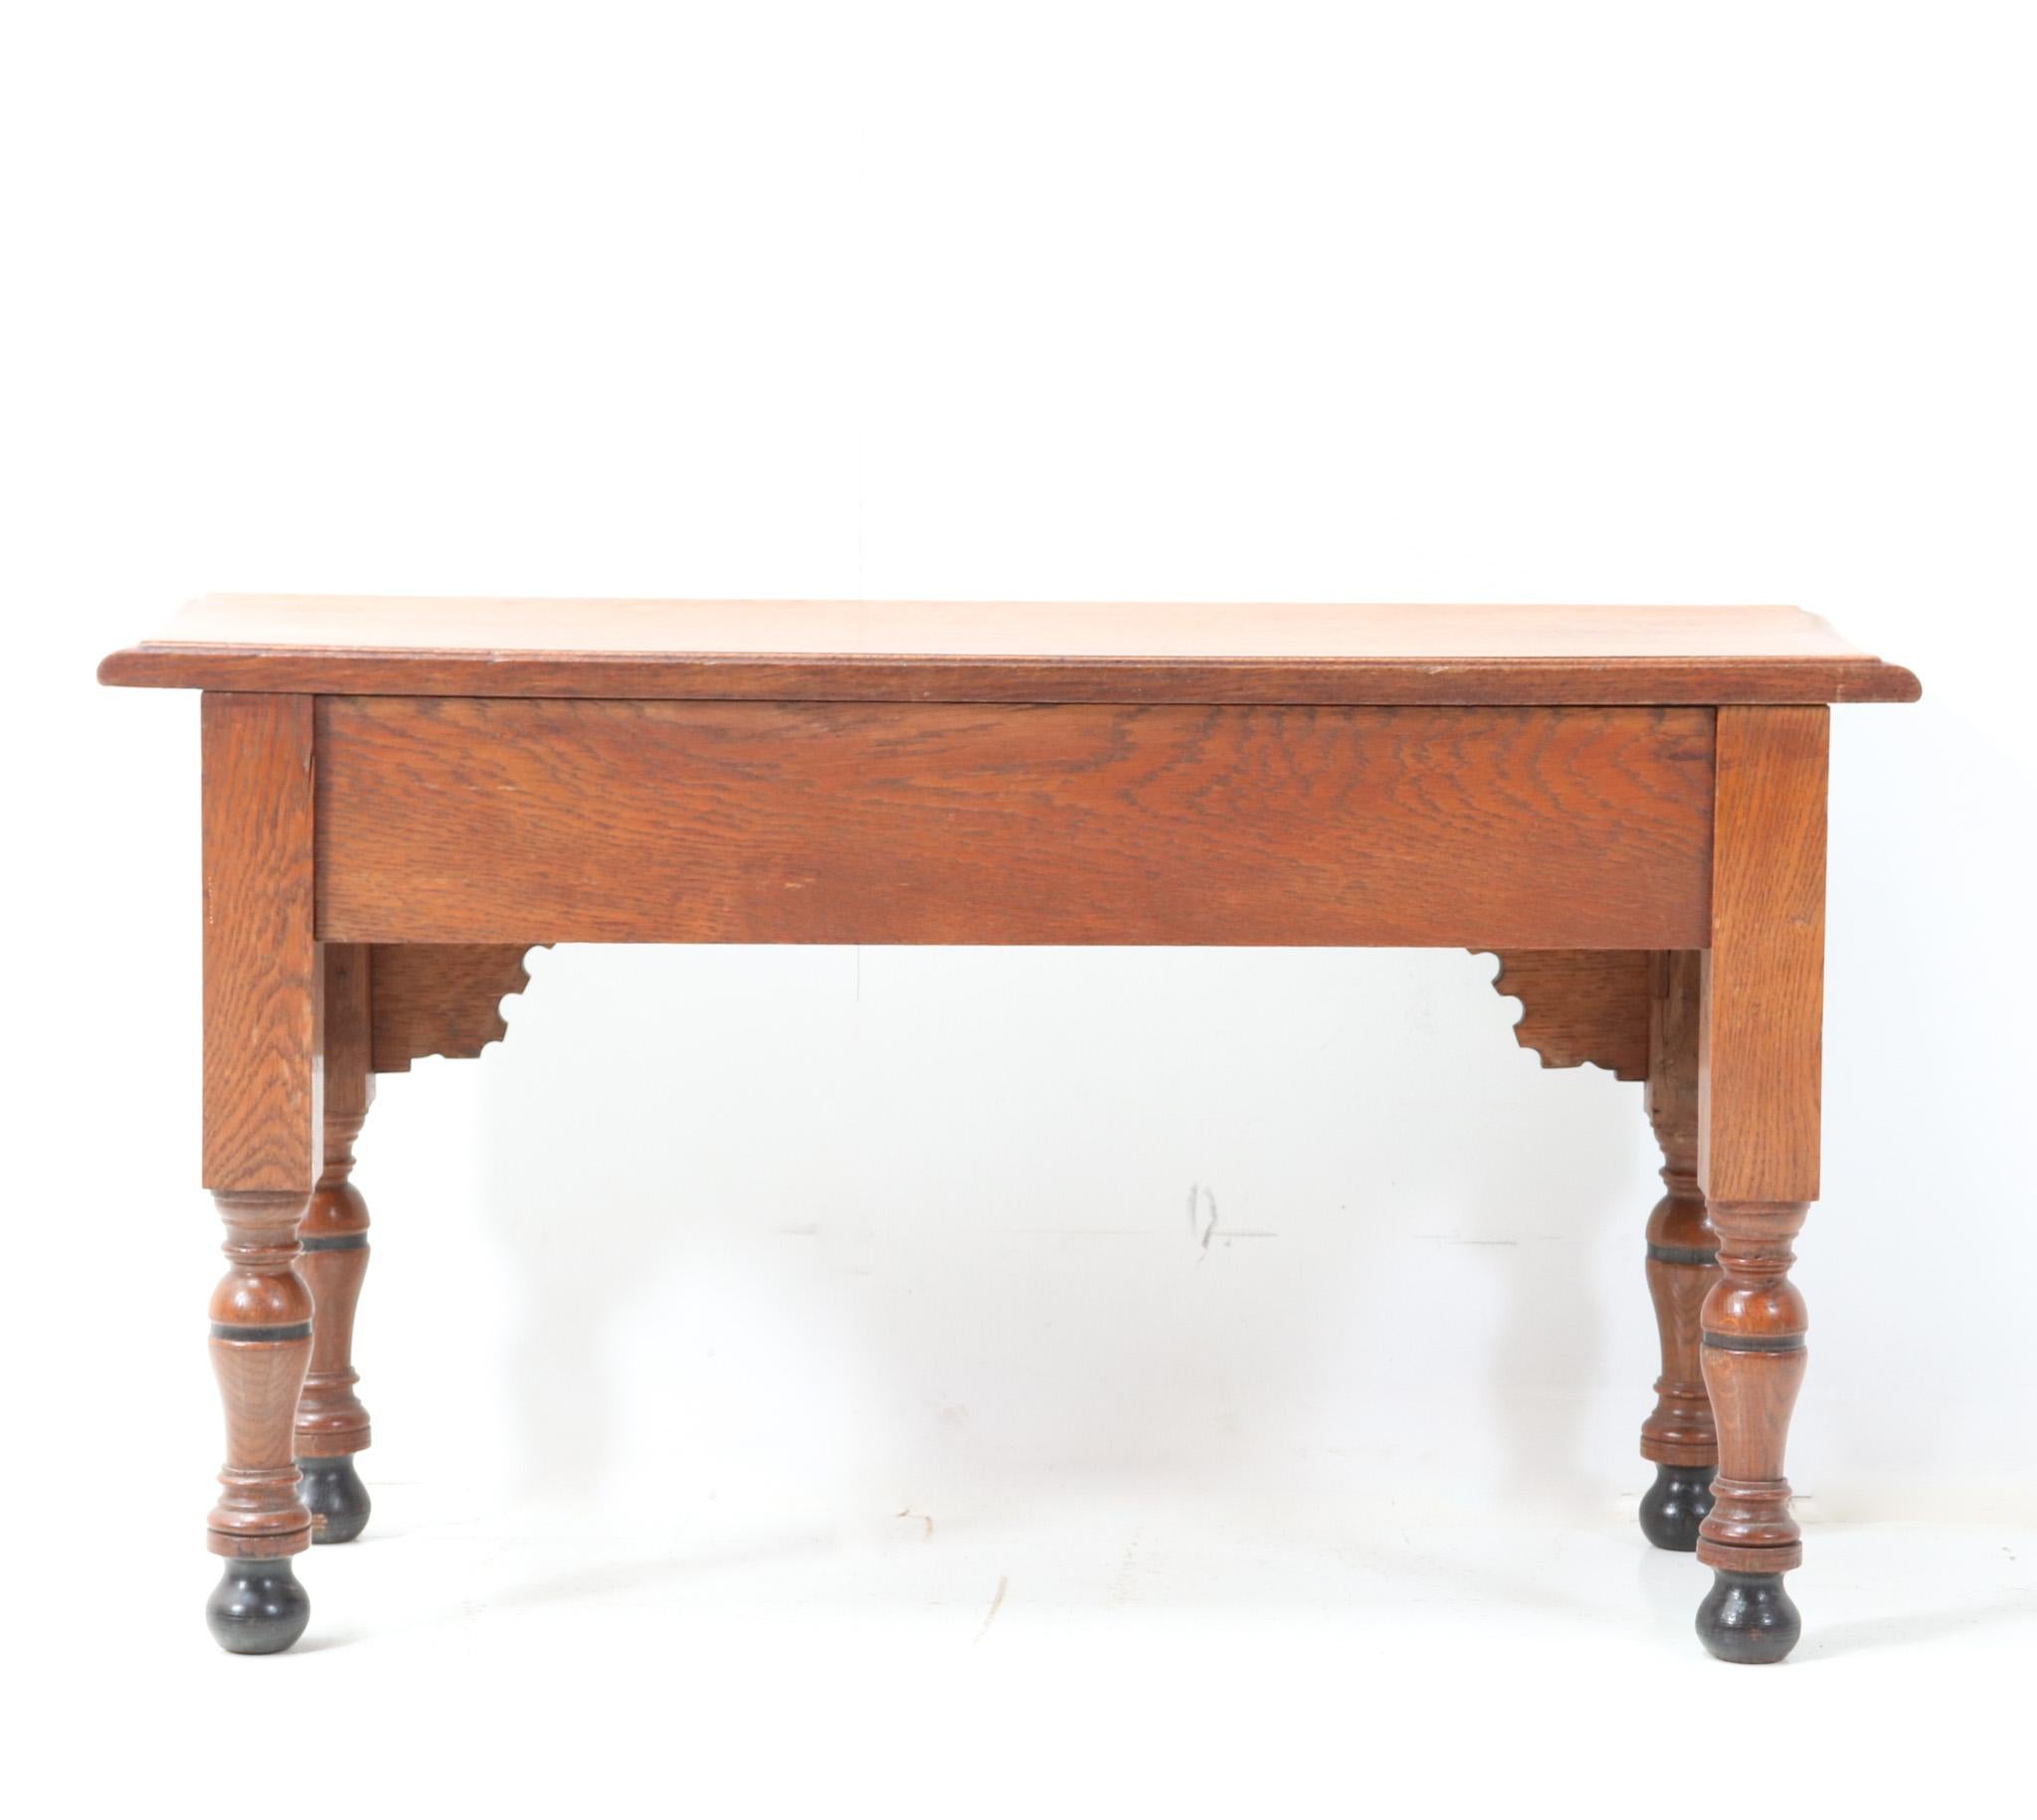 Mid-20th Century Oak Renaissance Style Small Bench or Side Table, 1950s For Sale